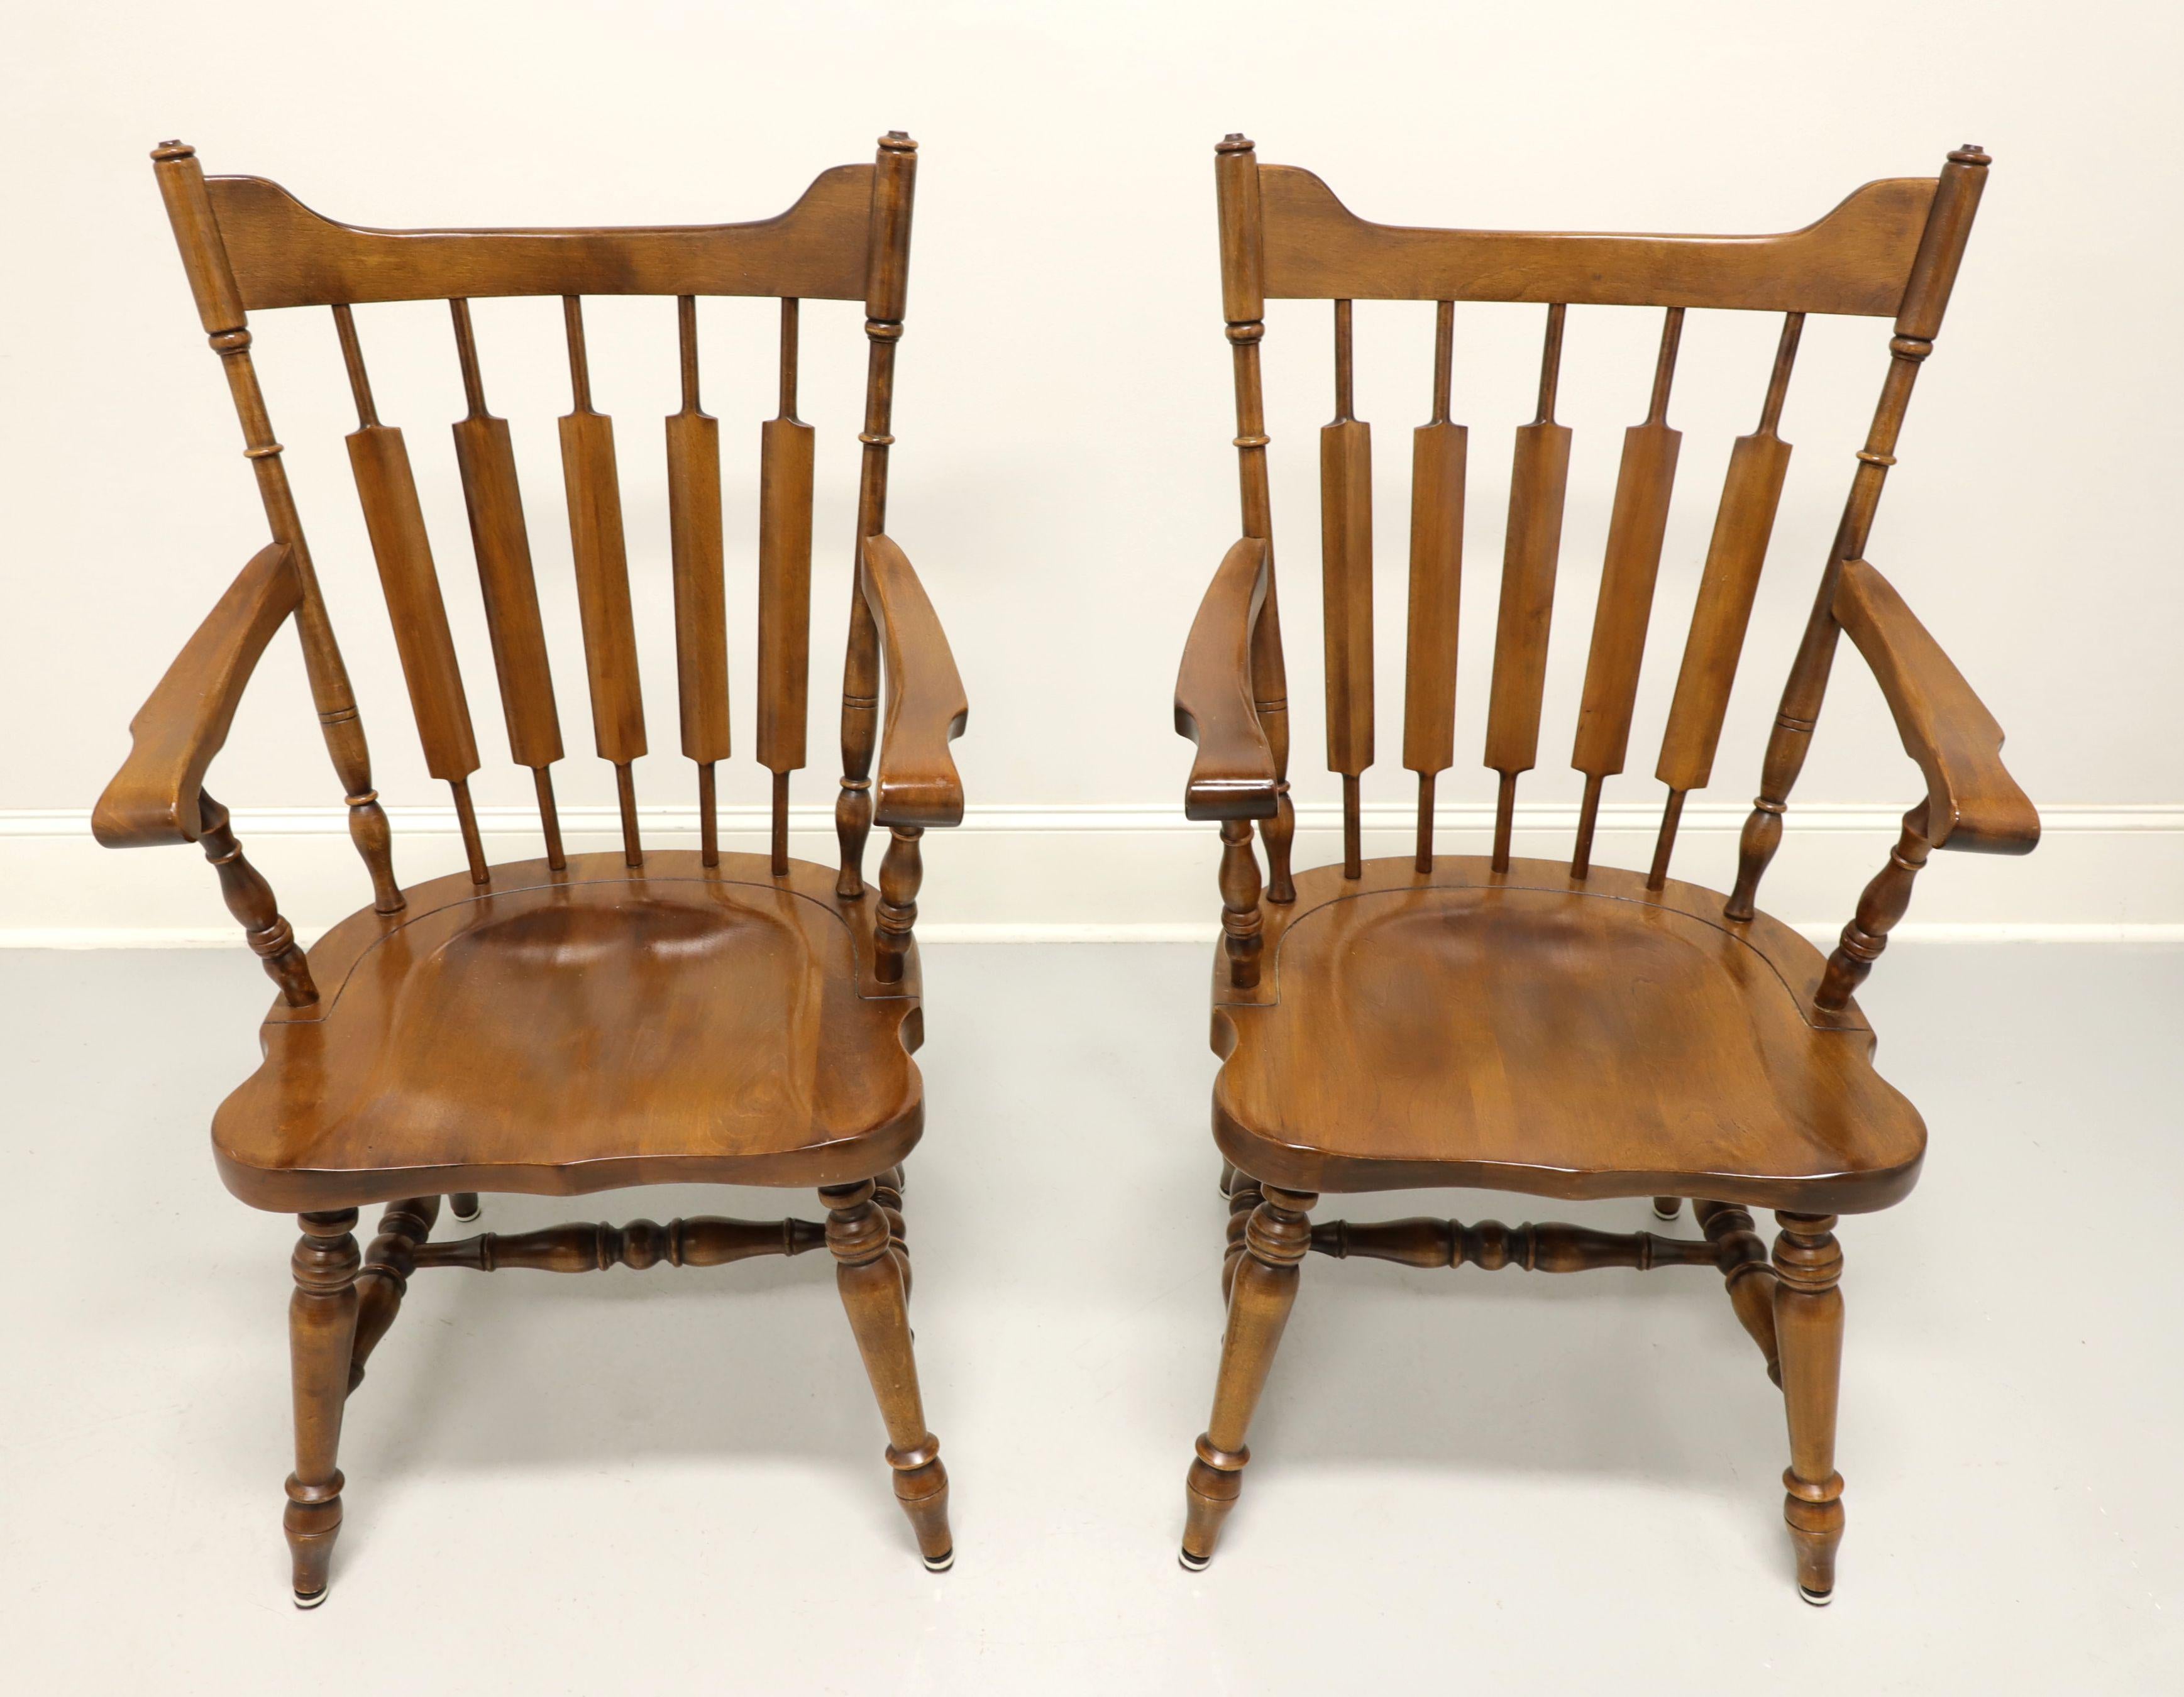 A pair of Early American Windsor style dining armchars by Temple Stuart, their 829 Rockingham. Solid maple with carved crestrail, cattail spindles backrest, curved arms, saddle shape seat, turned legs and stretchers. Made in the USA, in the late